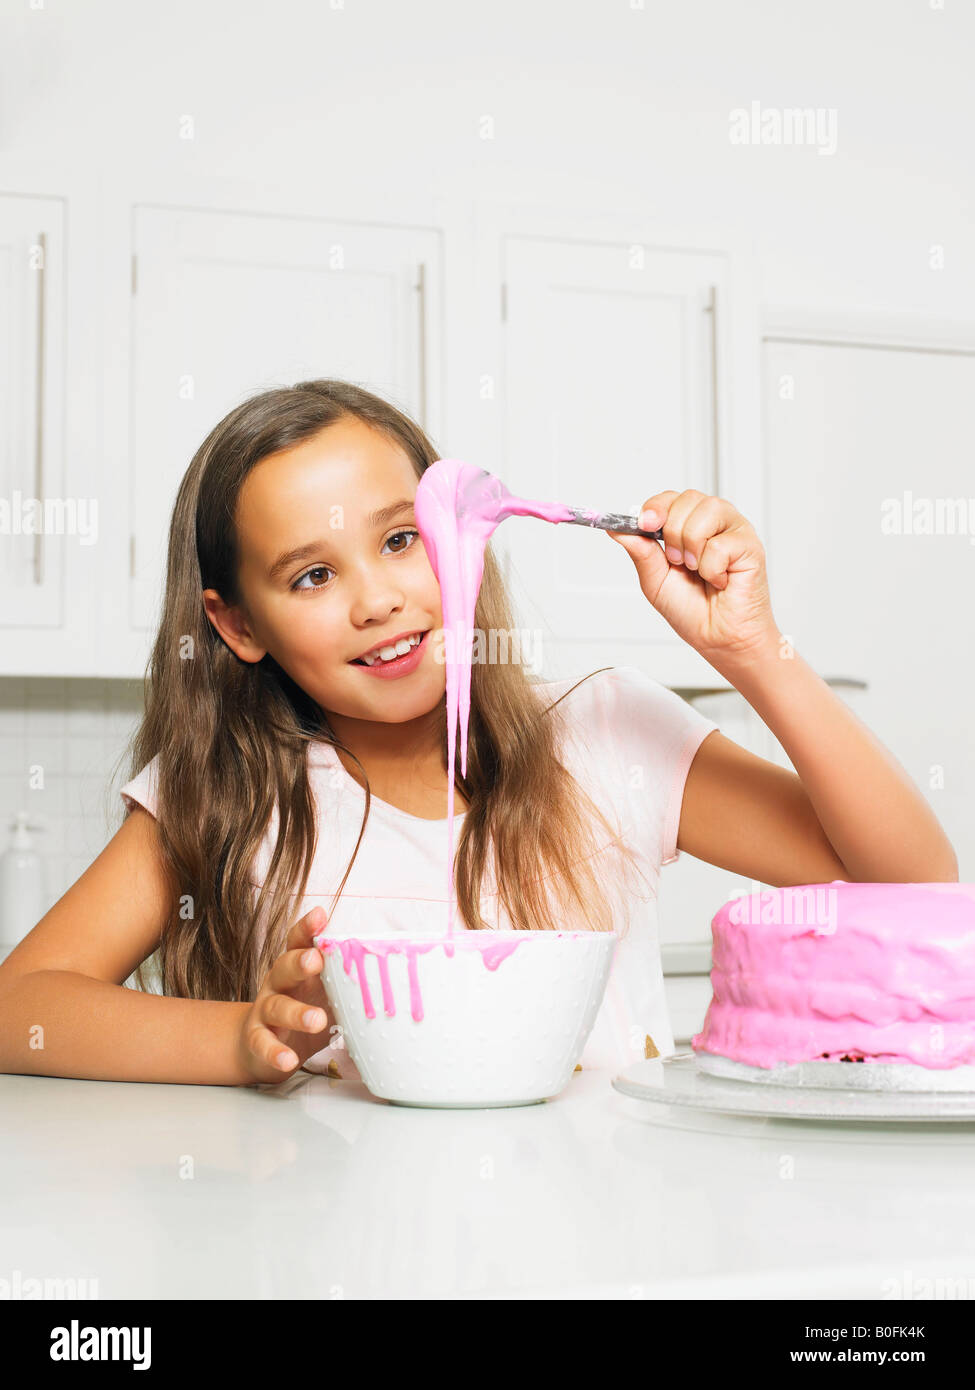 Girl (8-10) decorating cake with icing Banque D'Images